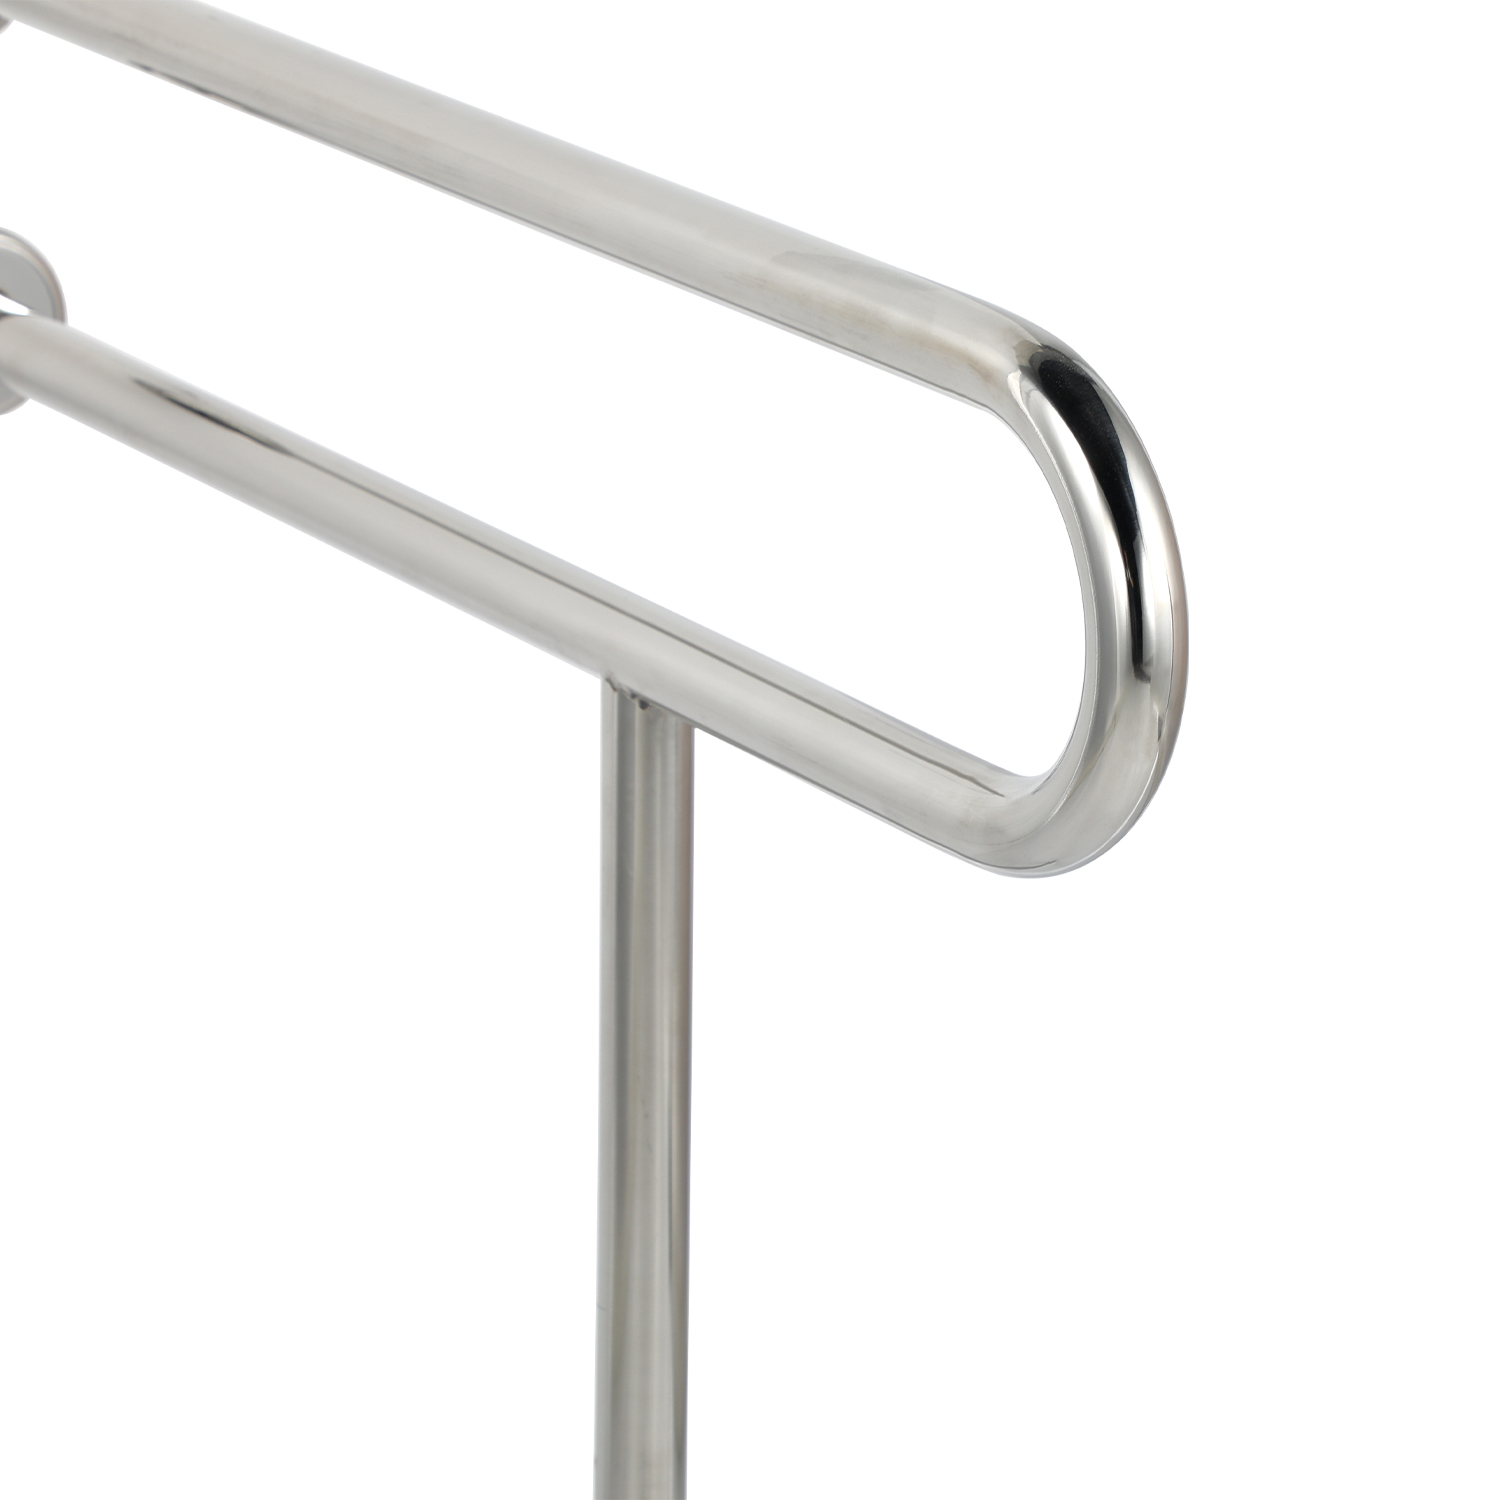 Stainless Steel Toilet Safety Bars